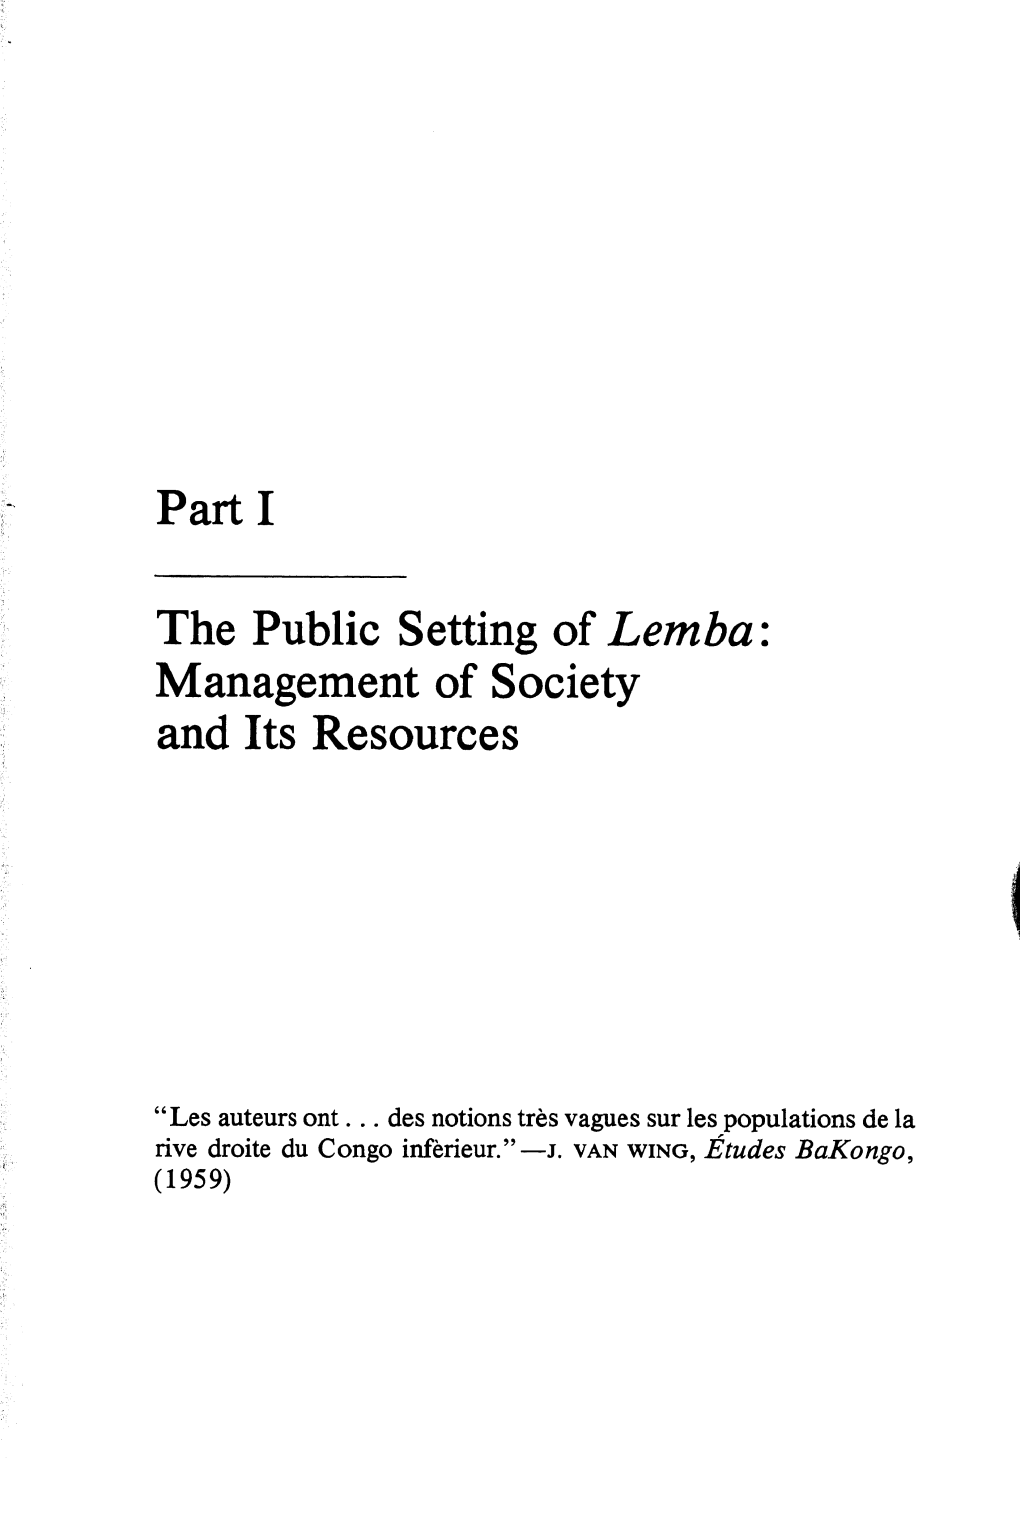 The Public Setting of Lemba : Management of Society and Its Resources